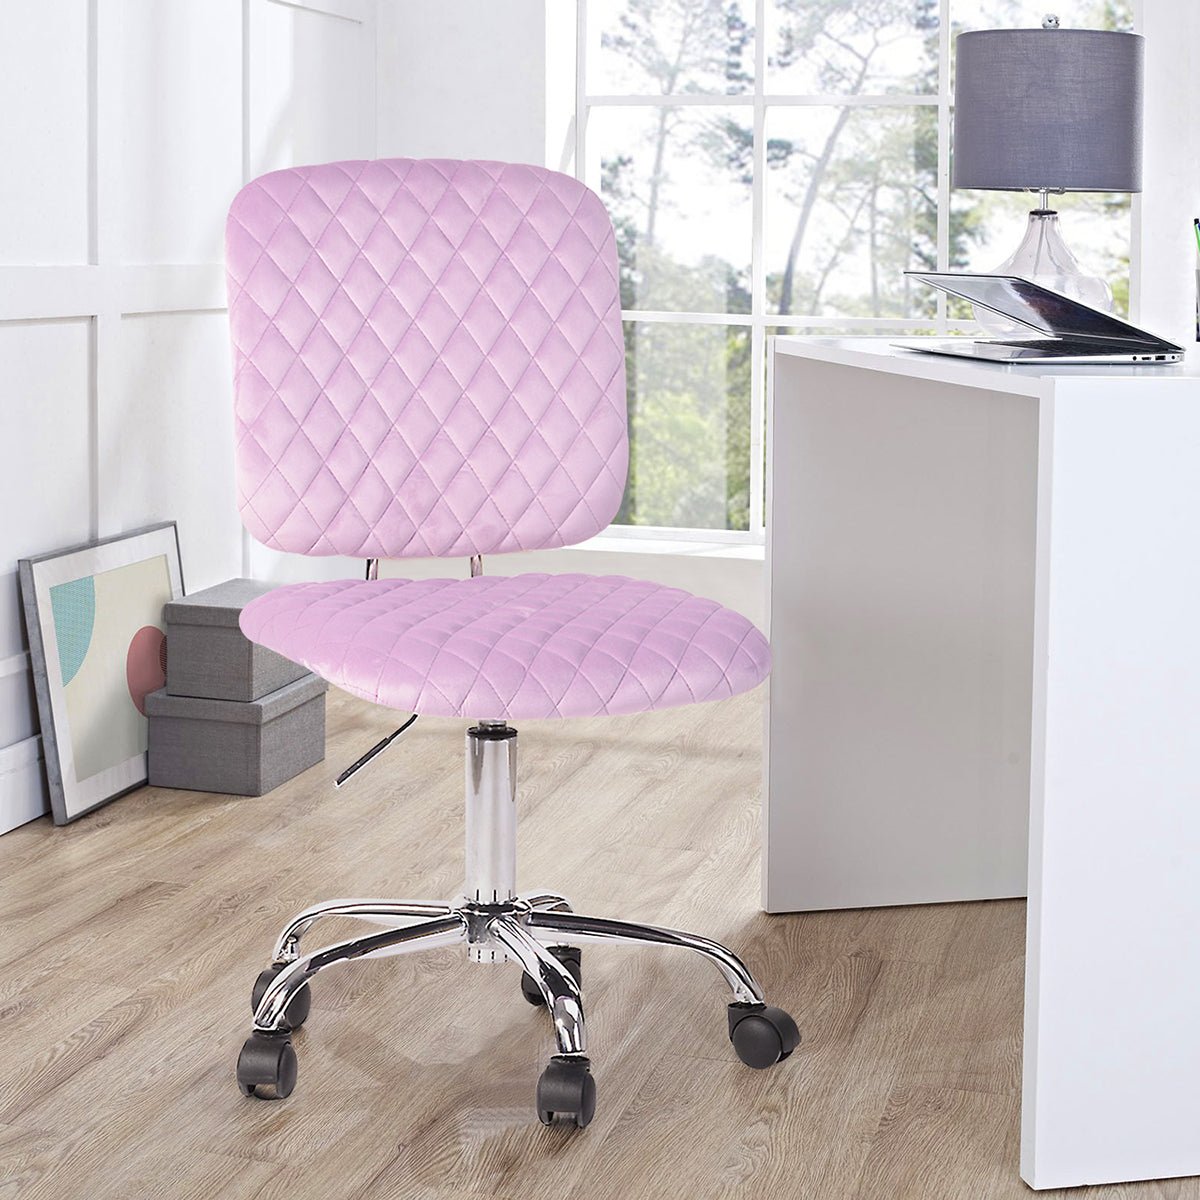 Upholstery Task Chair Home office chair - Demine Essentials